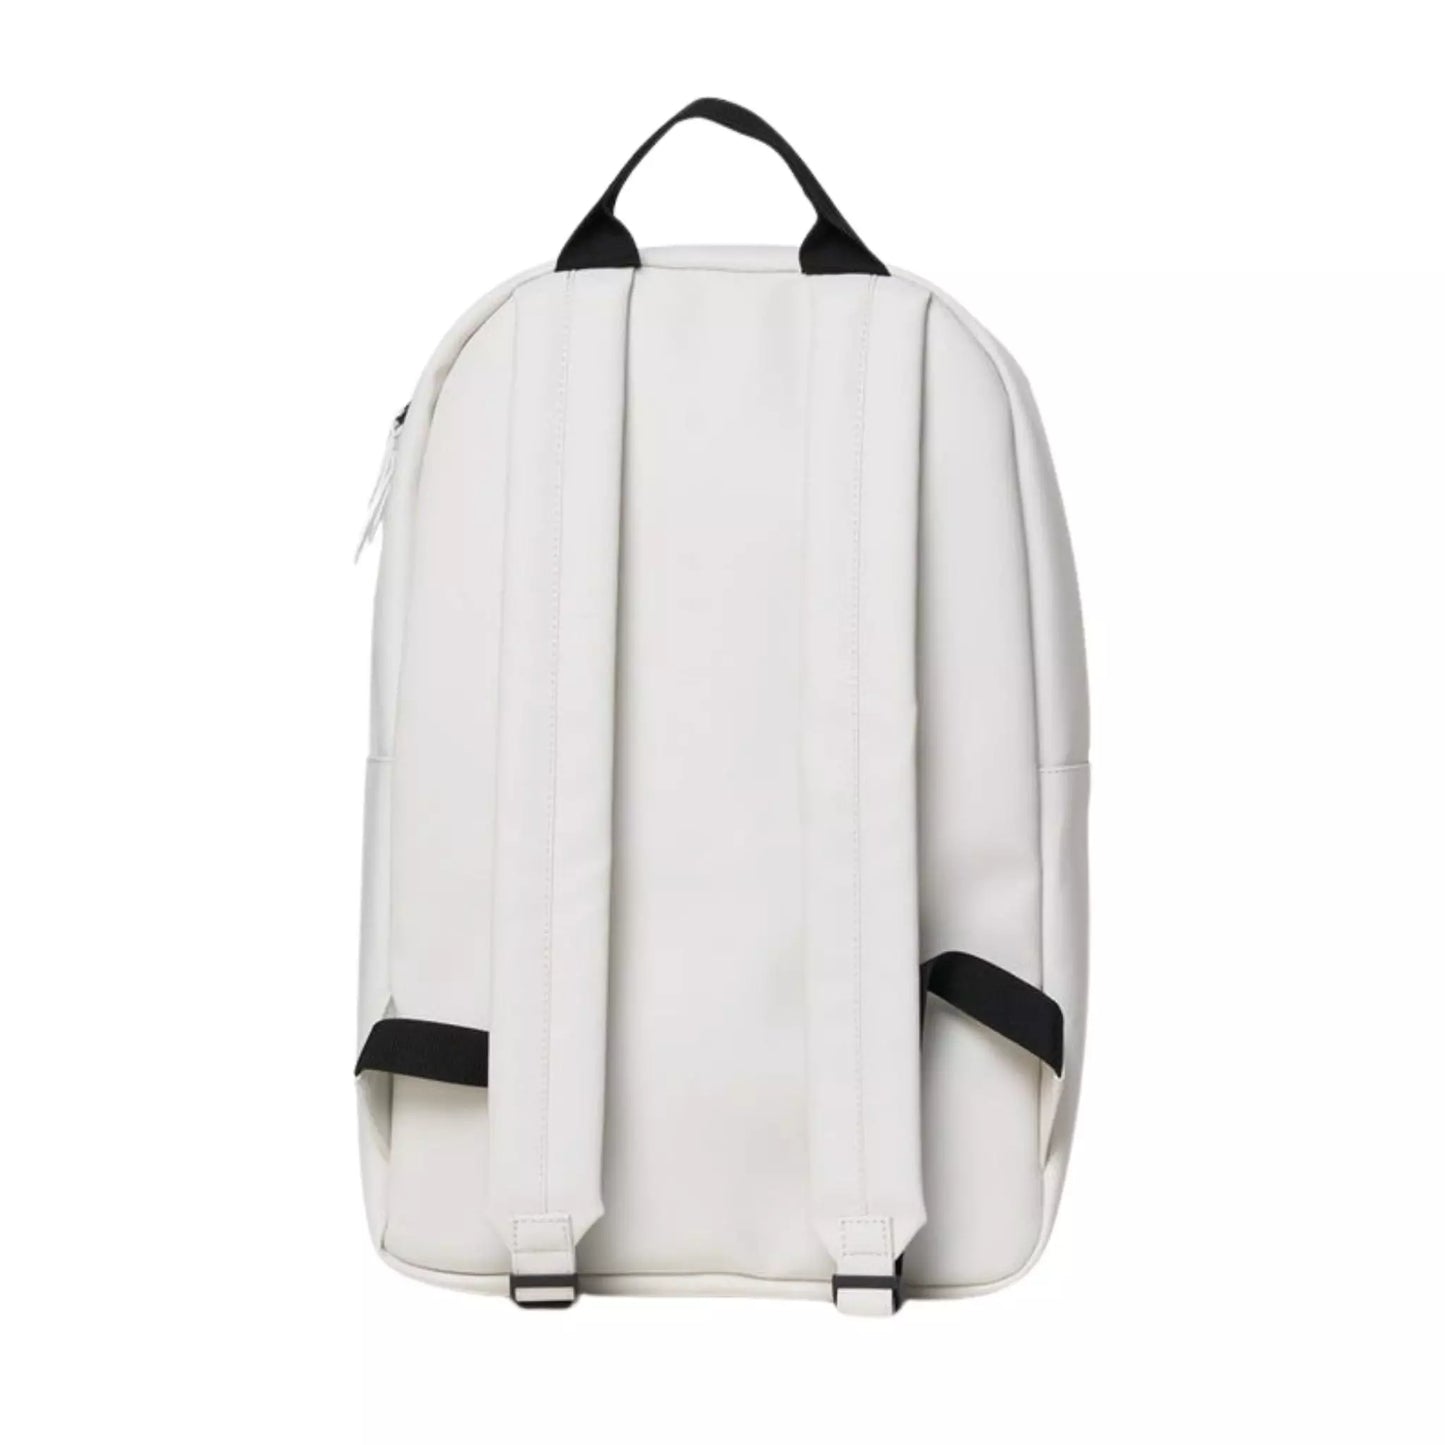 Rains waterproof backpack field bag off white for men and women back view